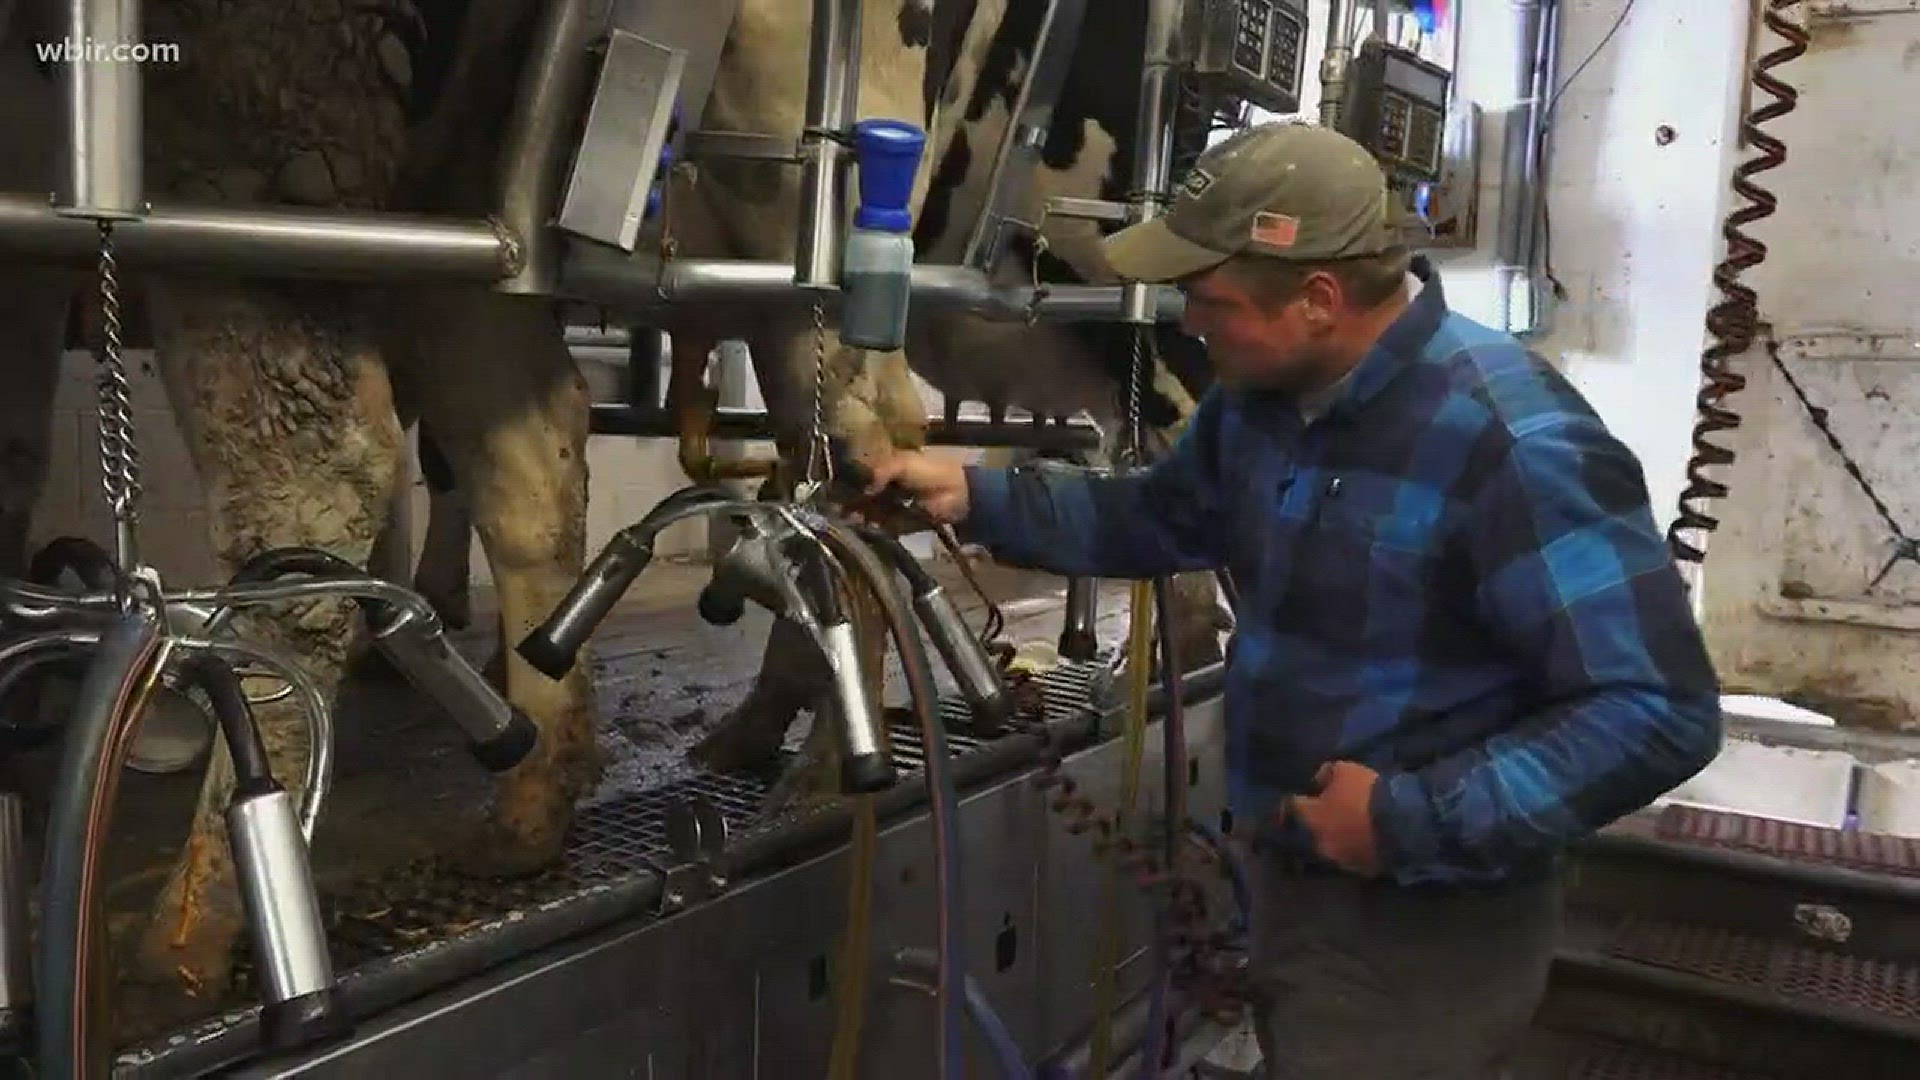 March 8, 2018: Some East Tennessee dairy producers say their farms are in jeopardy because there's currently too much milk on the market.